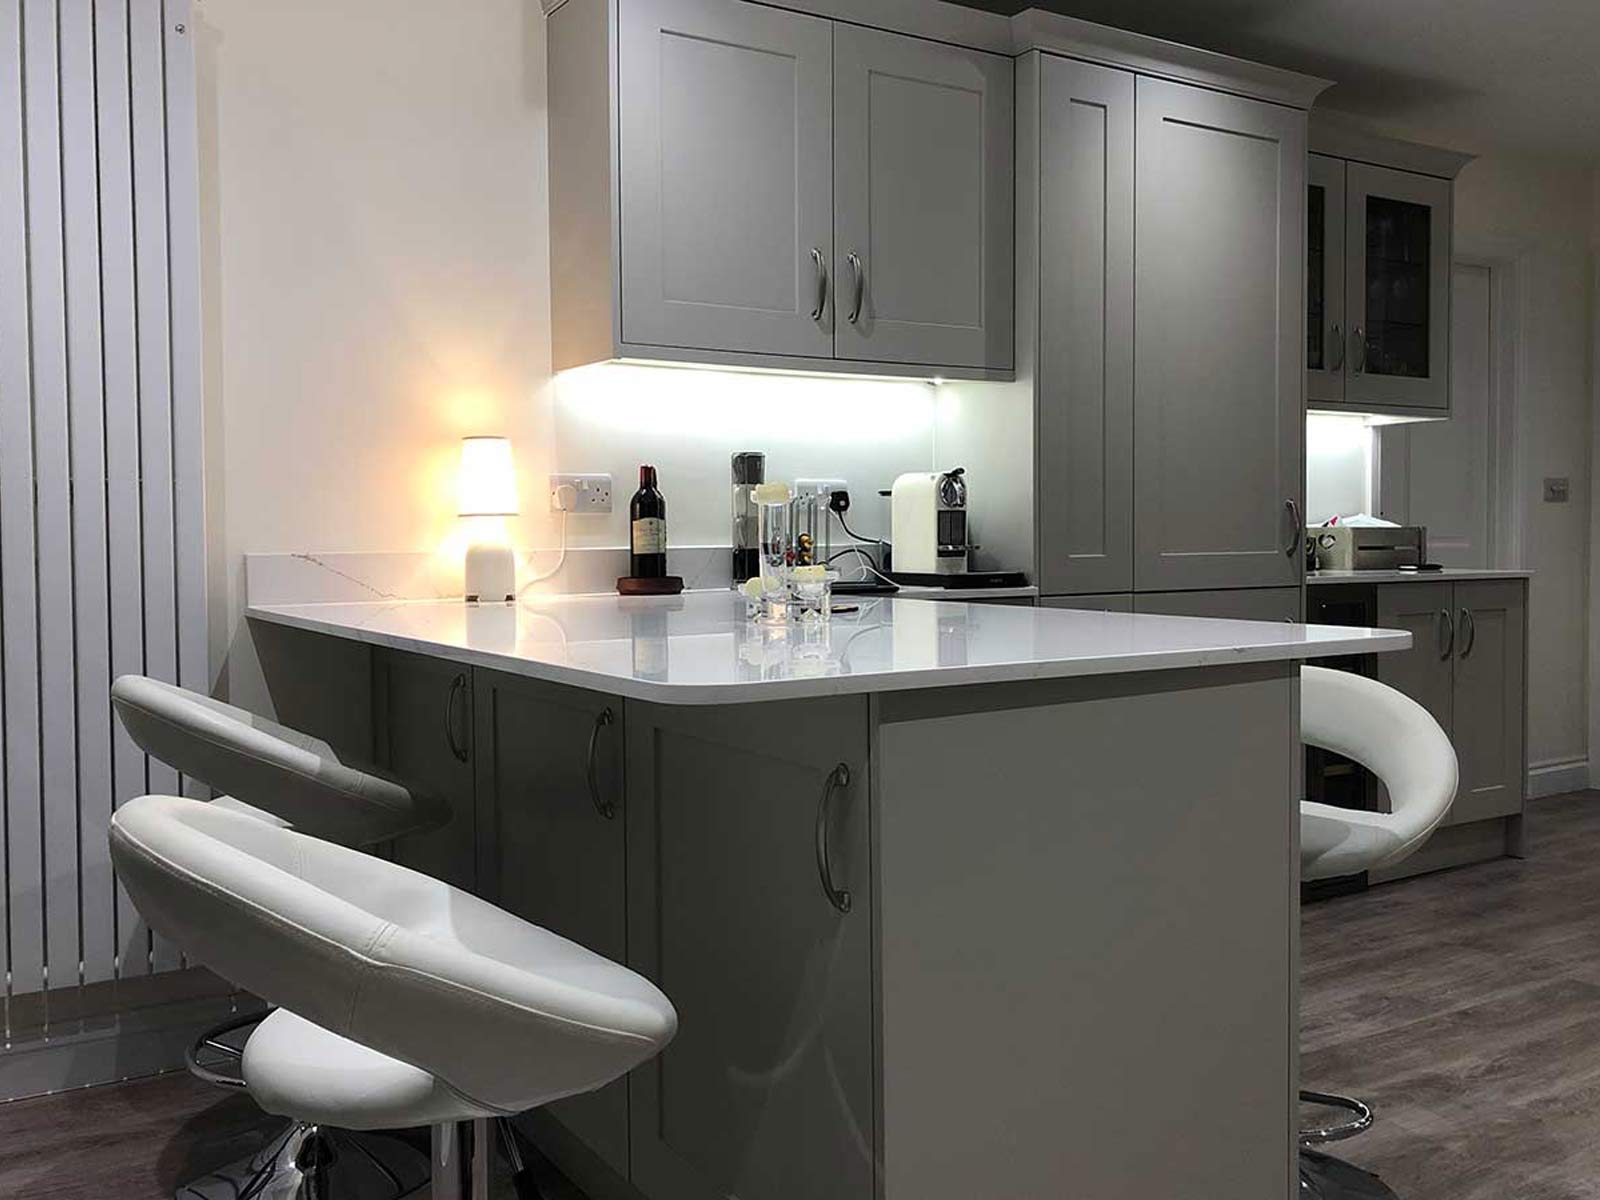 A kitchen peninsula worktop with mobile kitchen island barstools